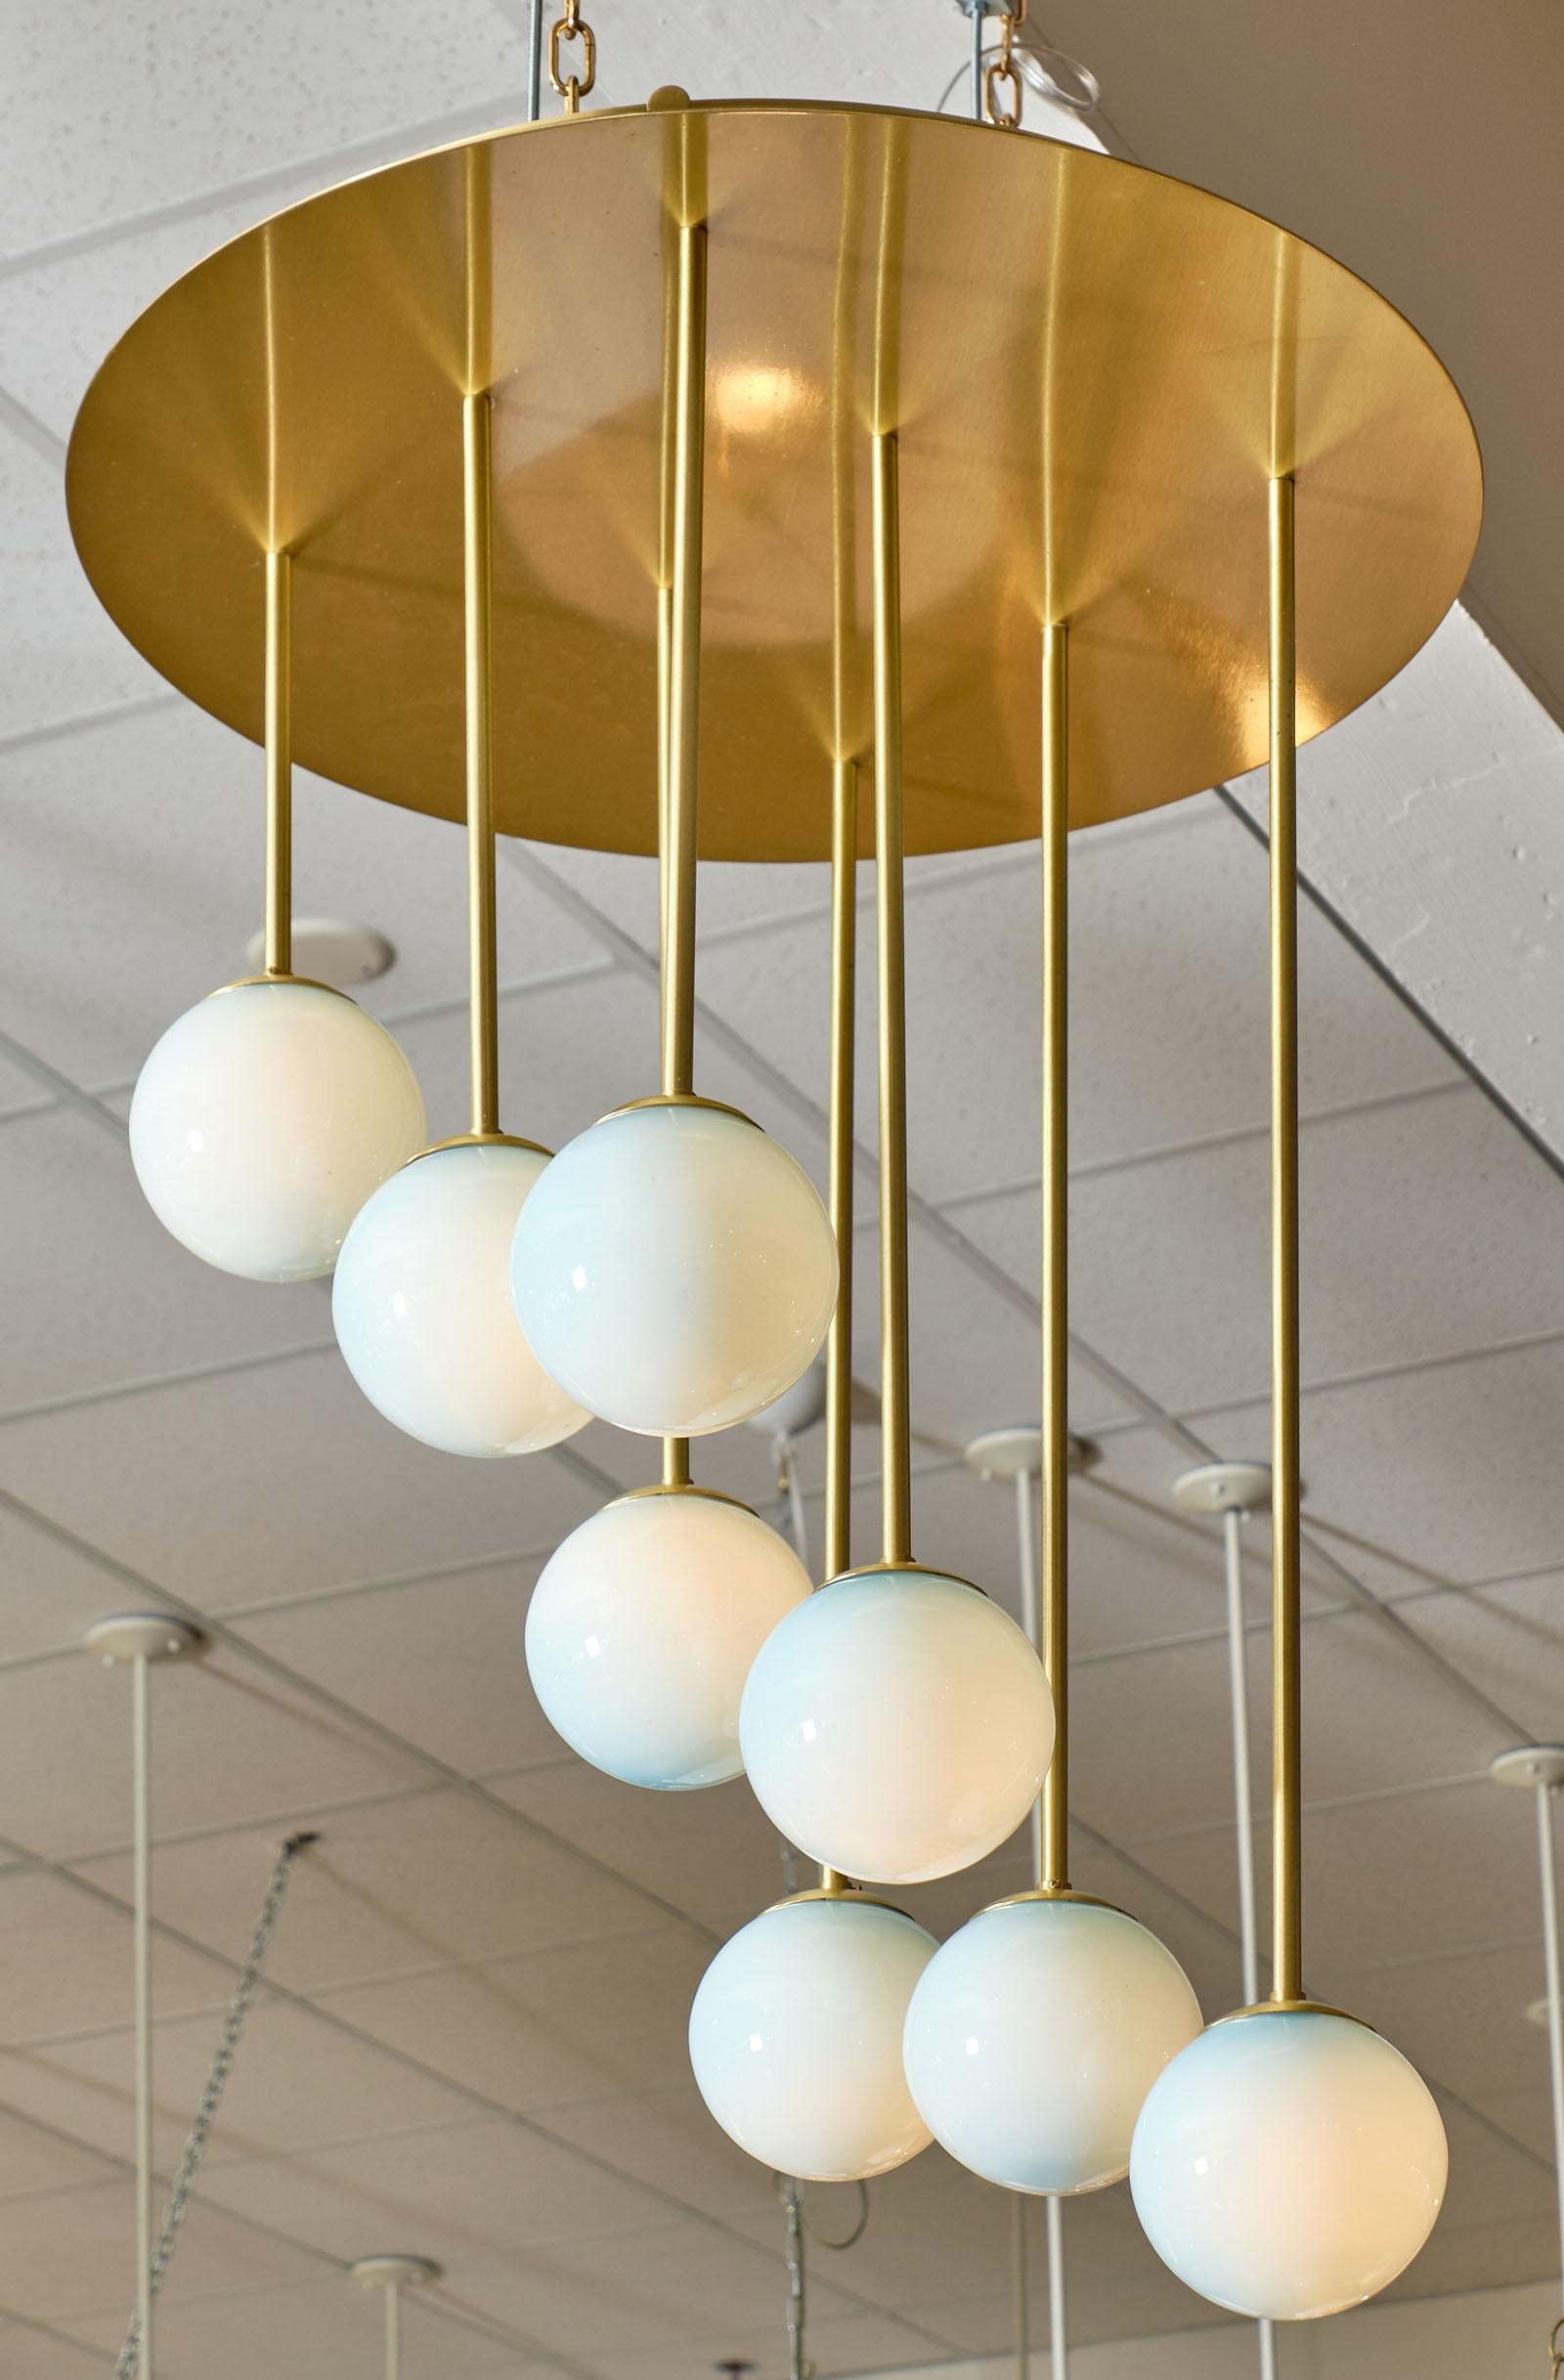 Murano glass “atoms” chandelier featuring a brushed brass structure and eight hand blown “atom” spheres in a light blue opaque color. We love this unique flush mount fixture. It has been newly wired to fit US standards.

This piece is currently